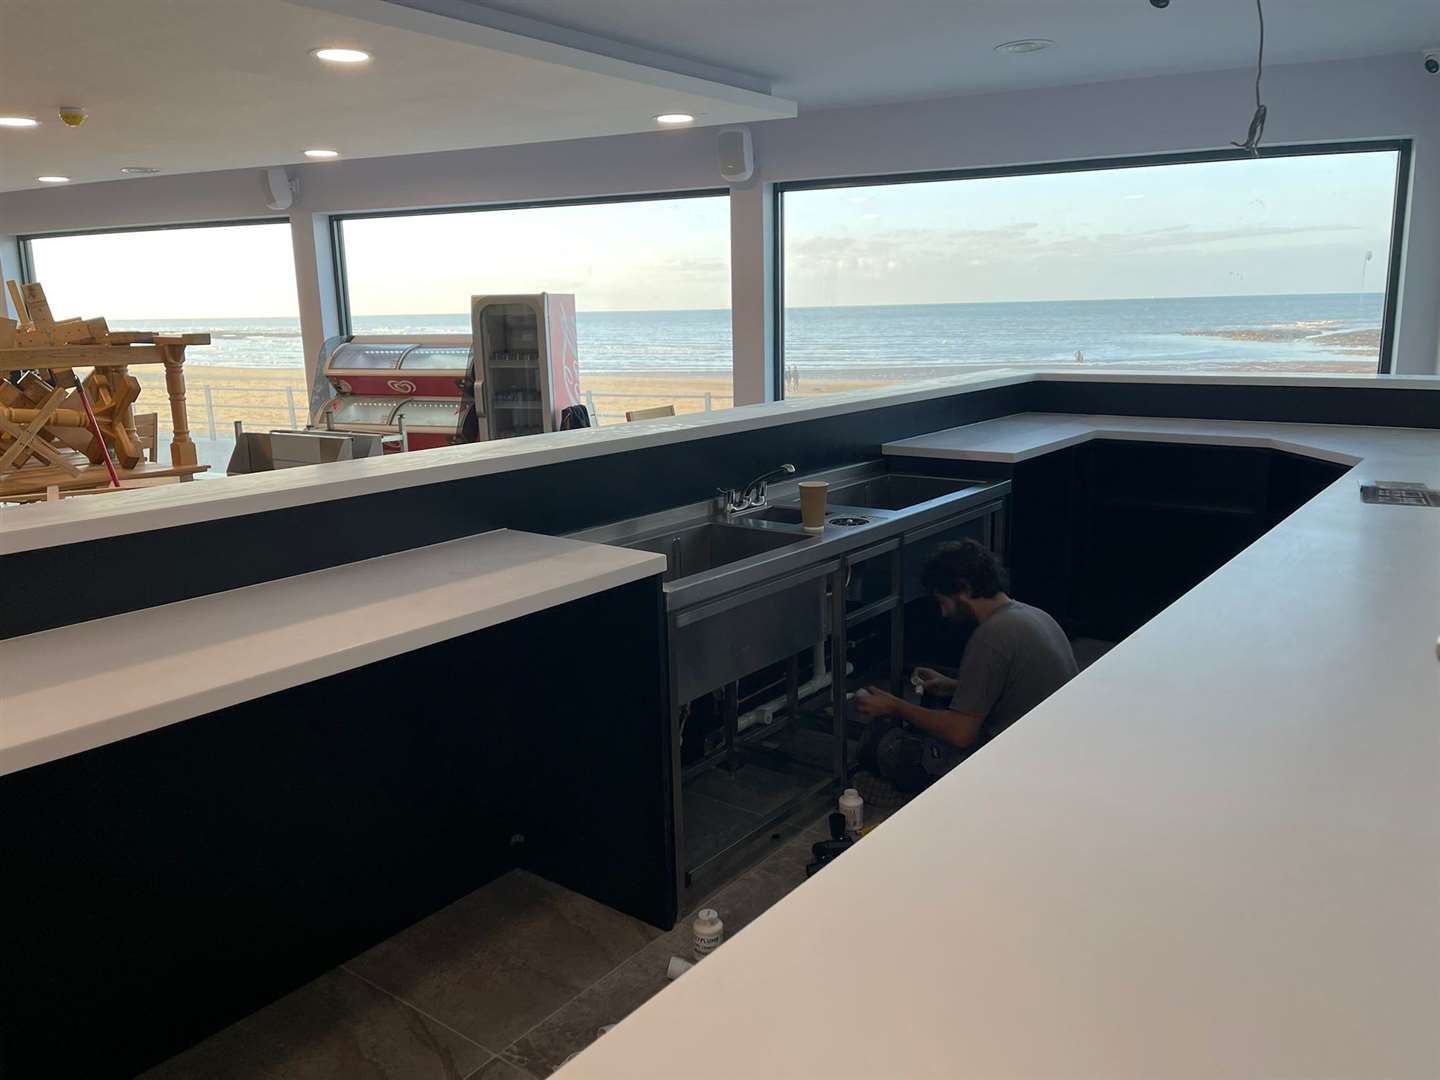 The St Mildred's Bay bar is almost complete